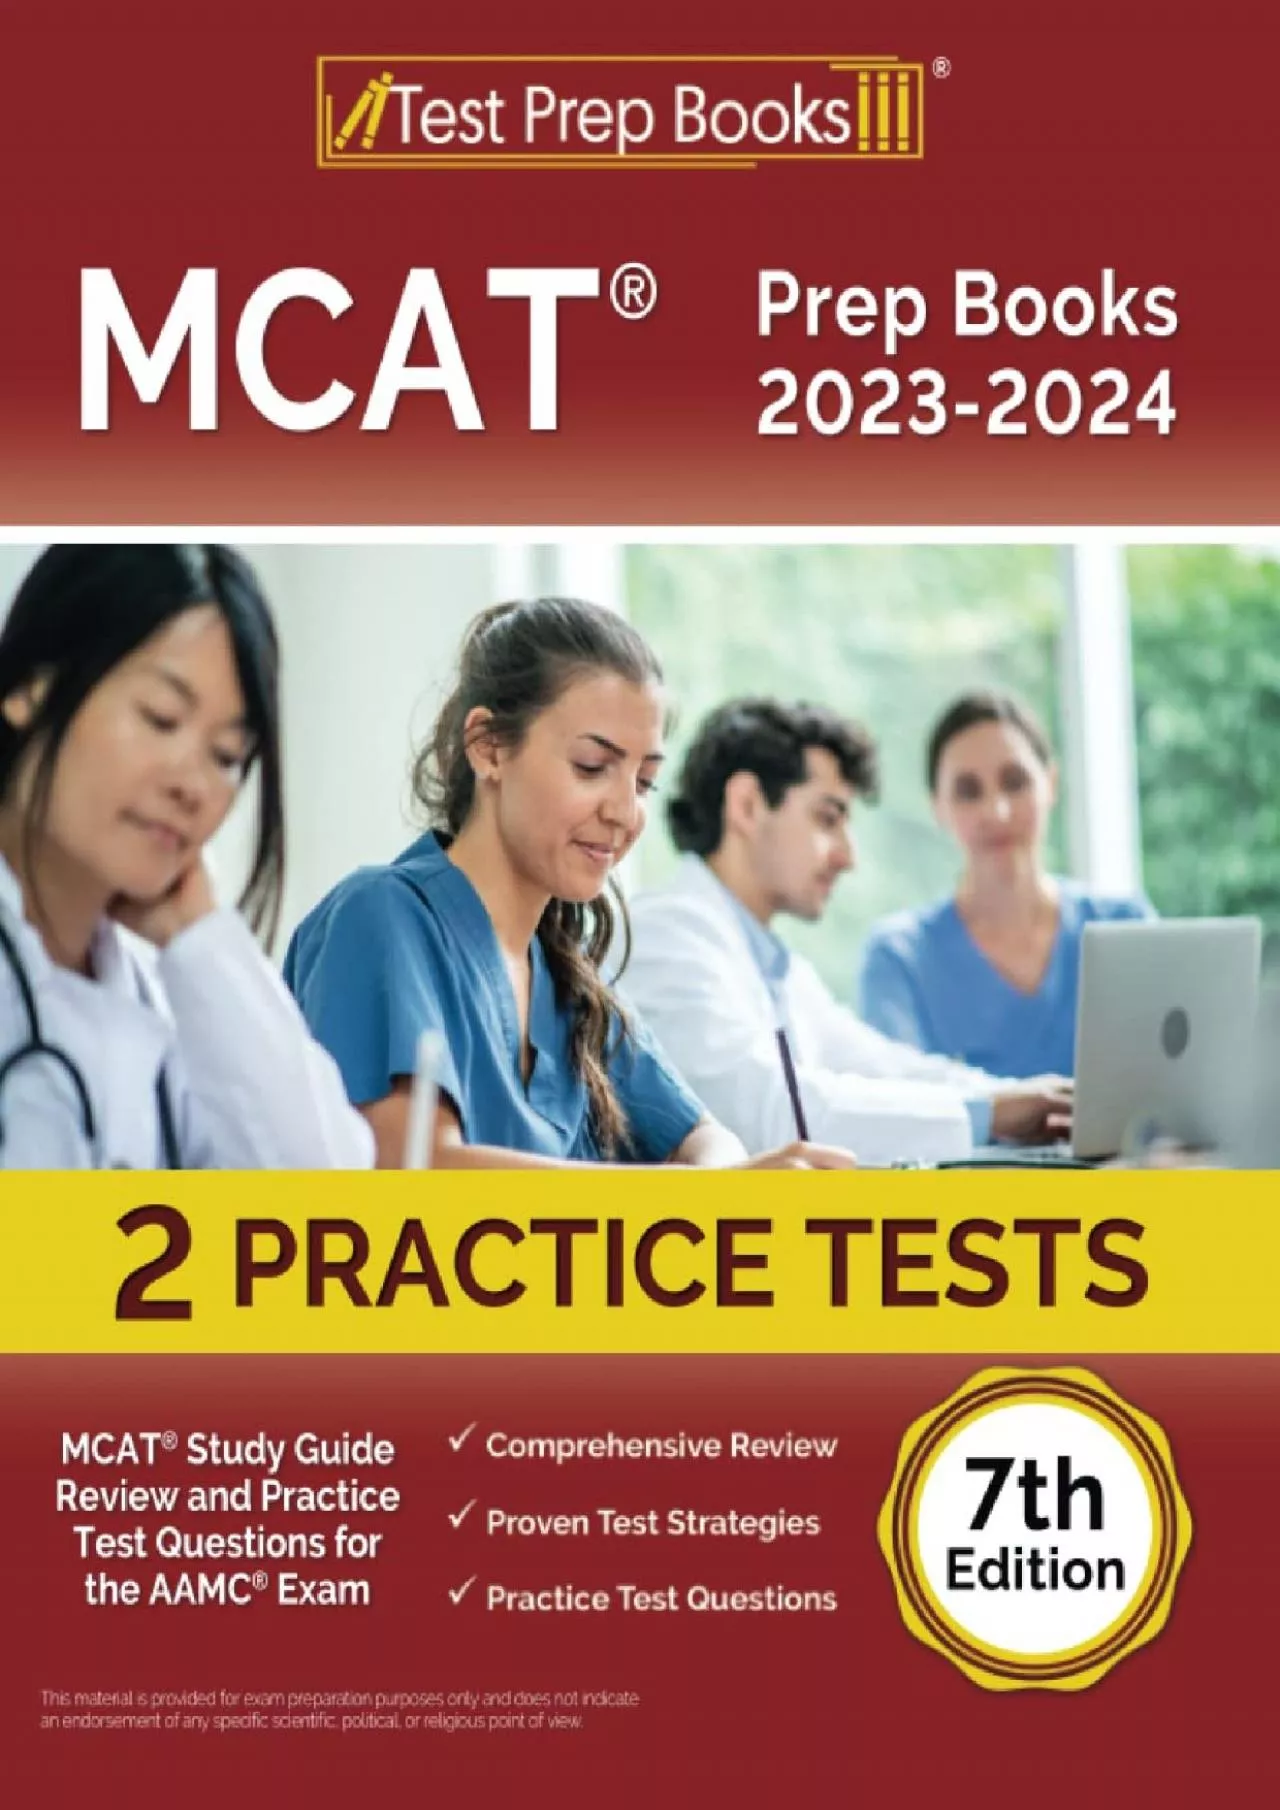 [READ] MCAT Prep Books 2023-2024: MCAT Study Guide Review and 2 Practice Tests for the